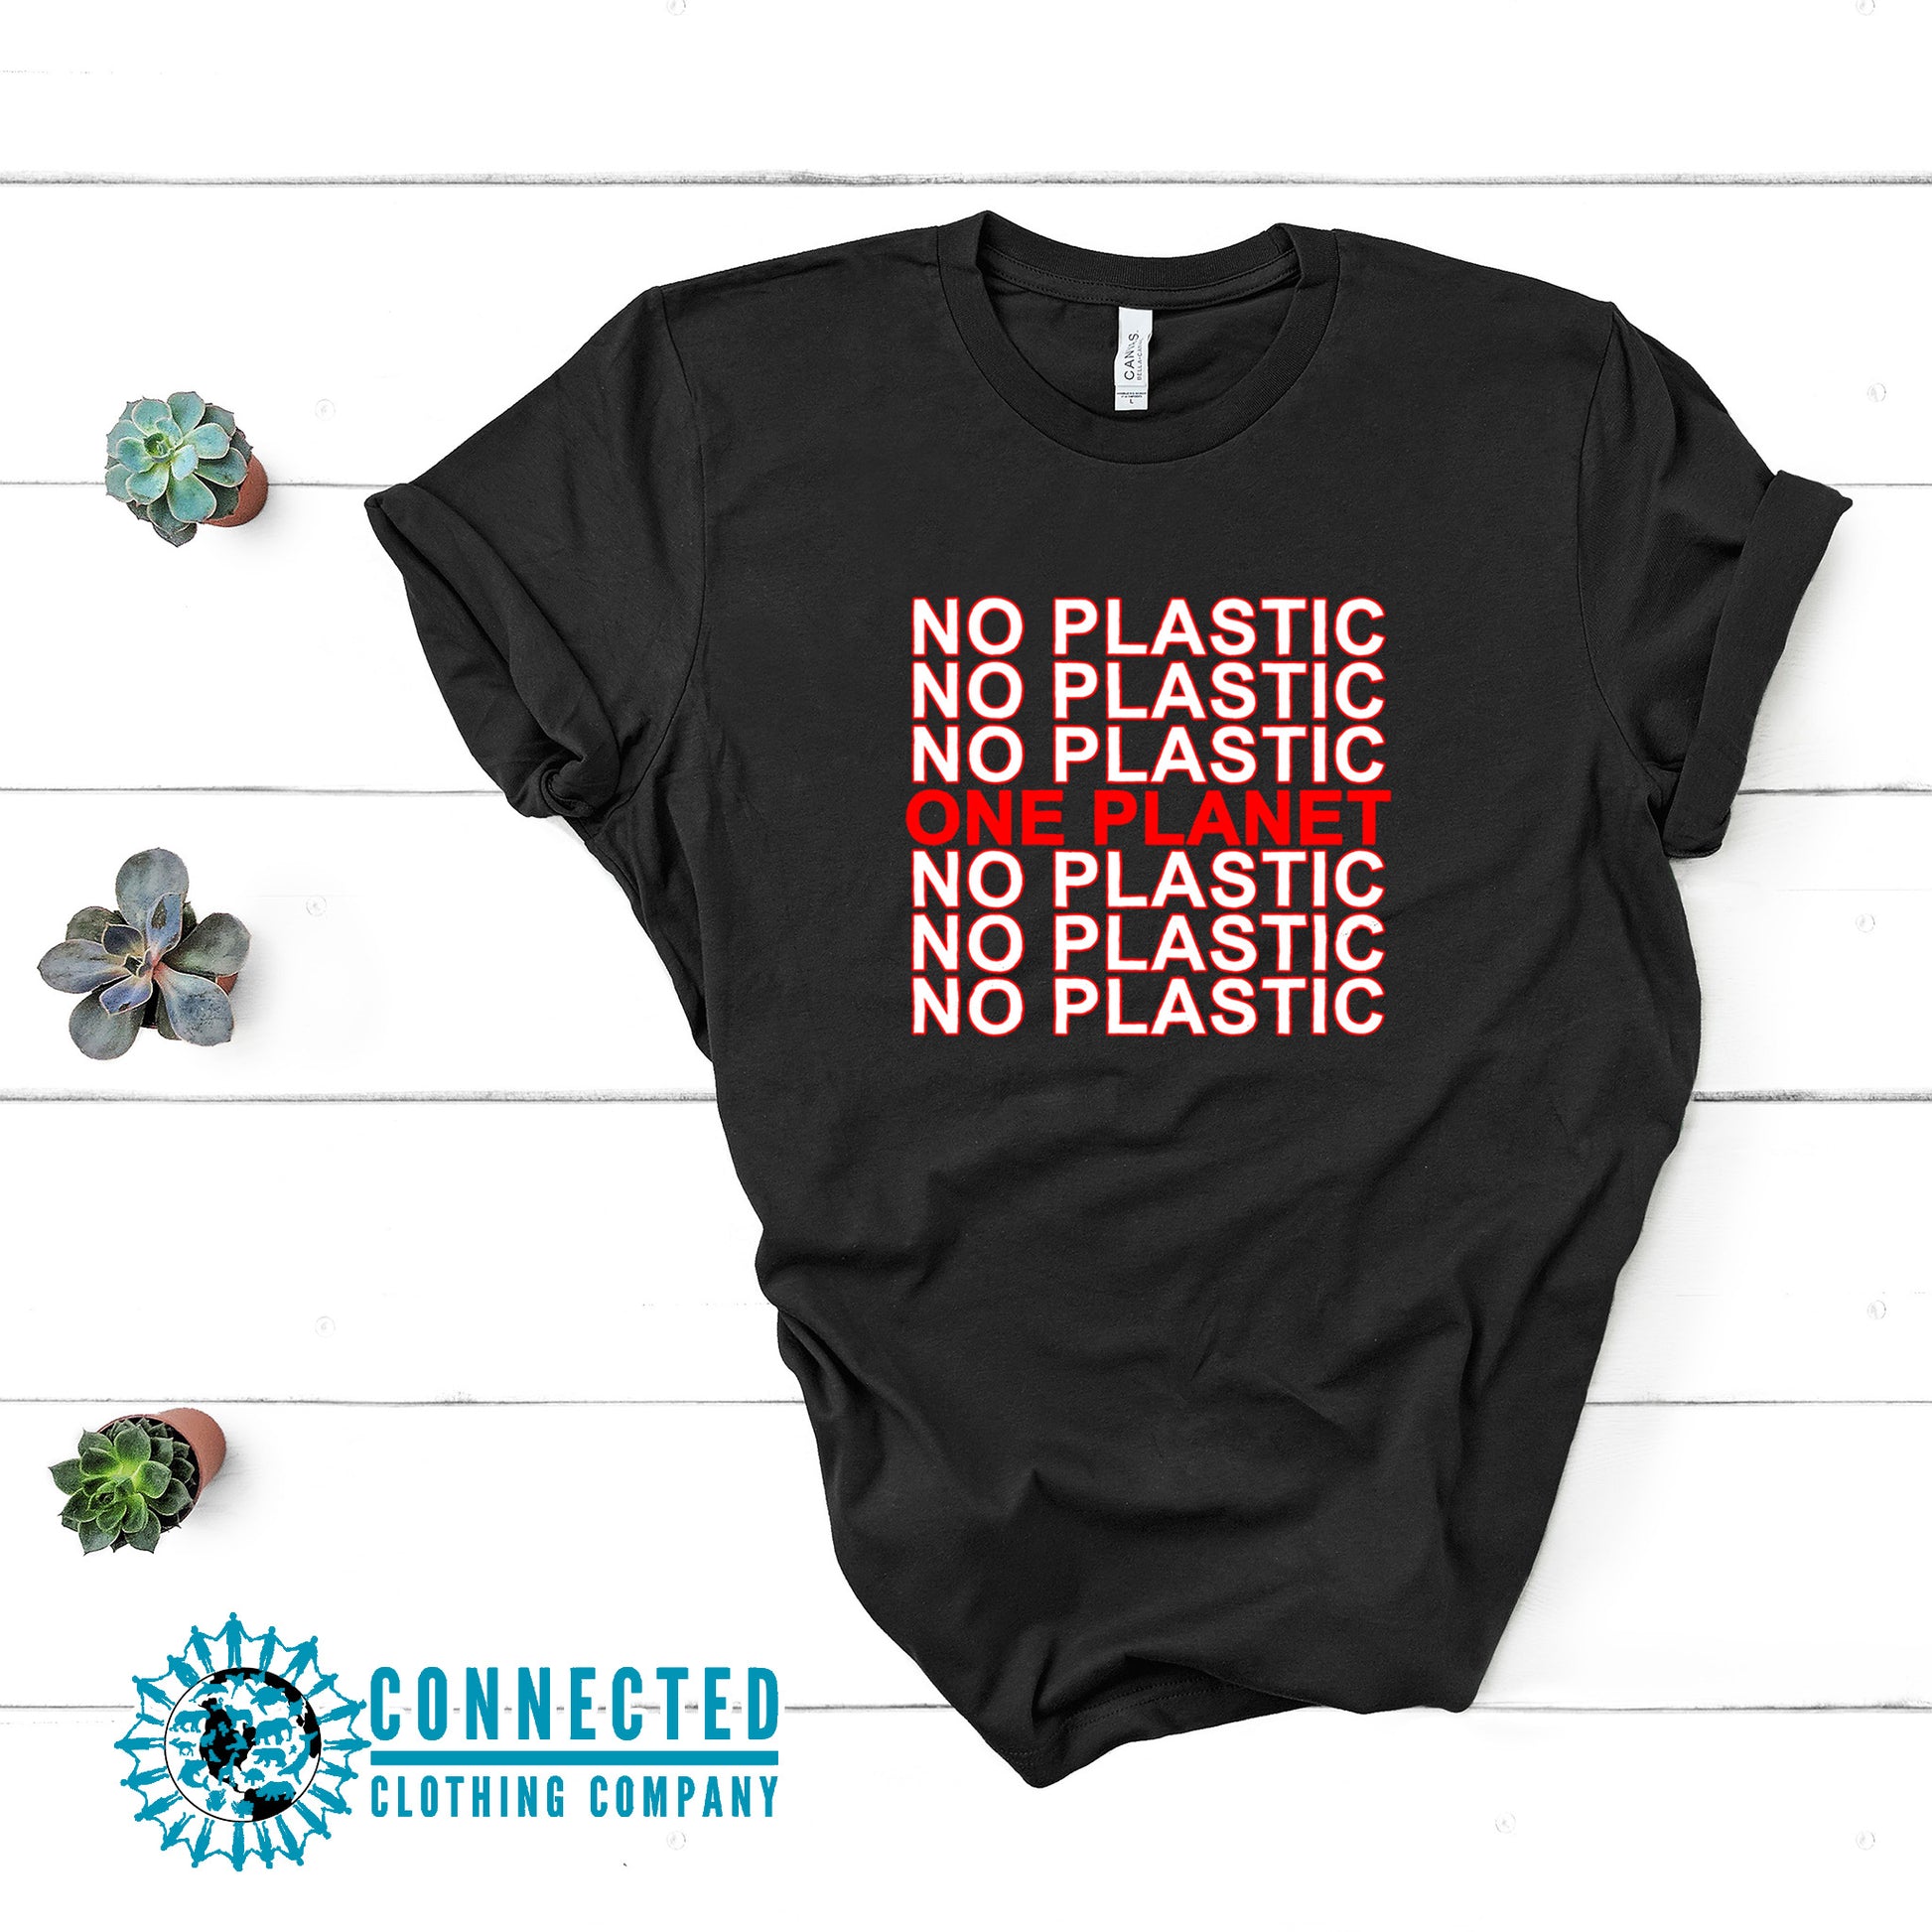 Black No Plastic One Planet Short-Sleeve Tee - 10% of profits donated to ocean conservation